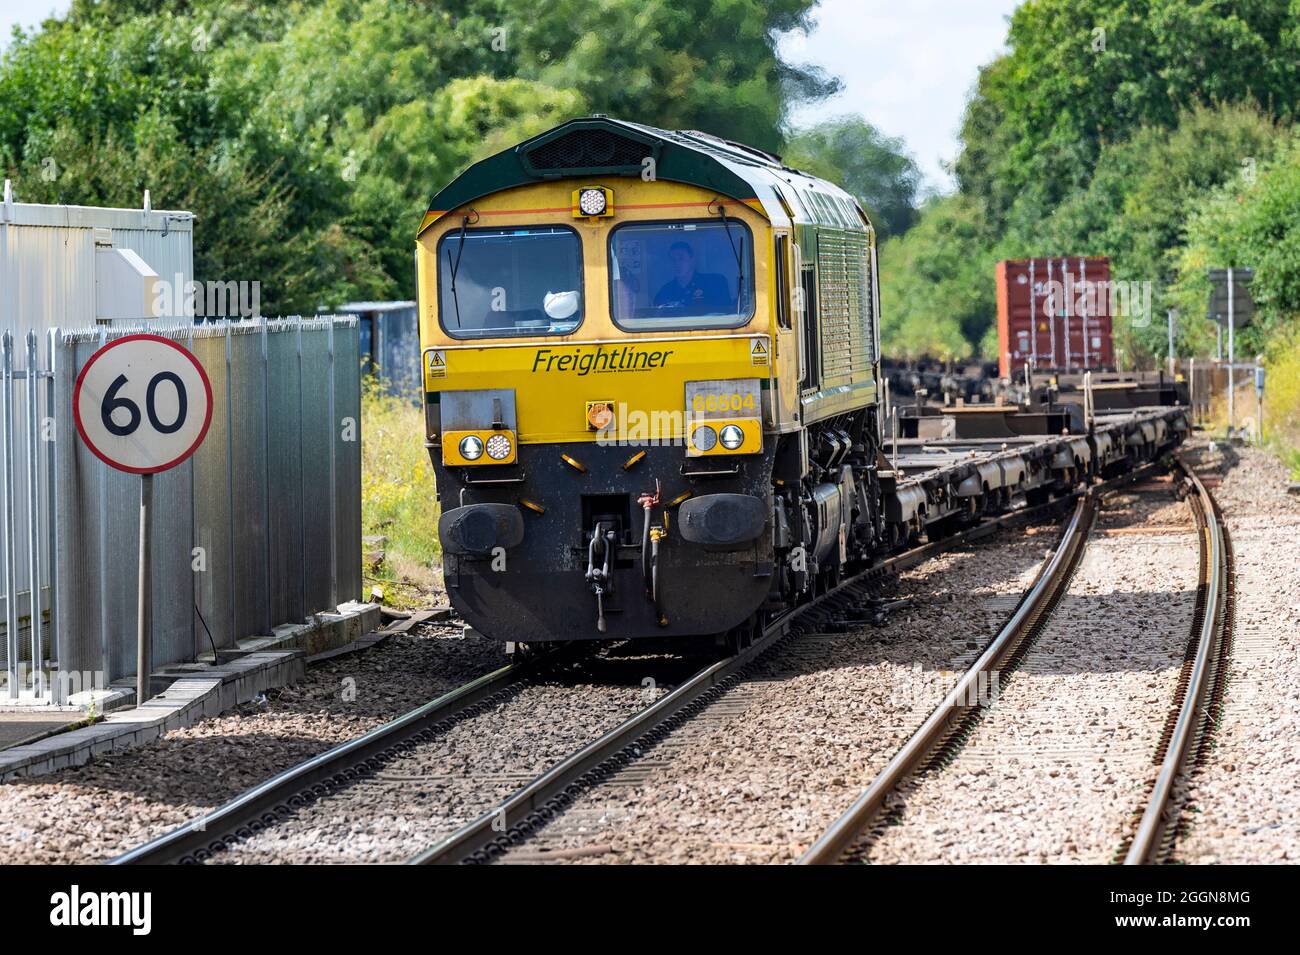 Freightliner freight train on the Ipswich to Felixstowe container port line, Westerfield, Suffolk, UK. Stock Photo